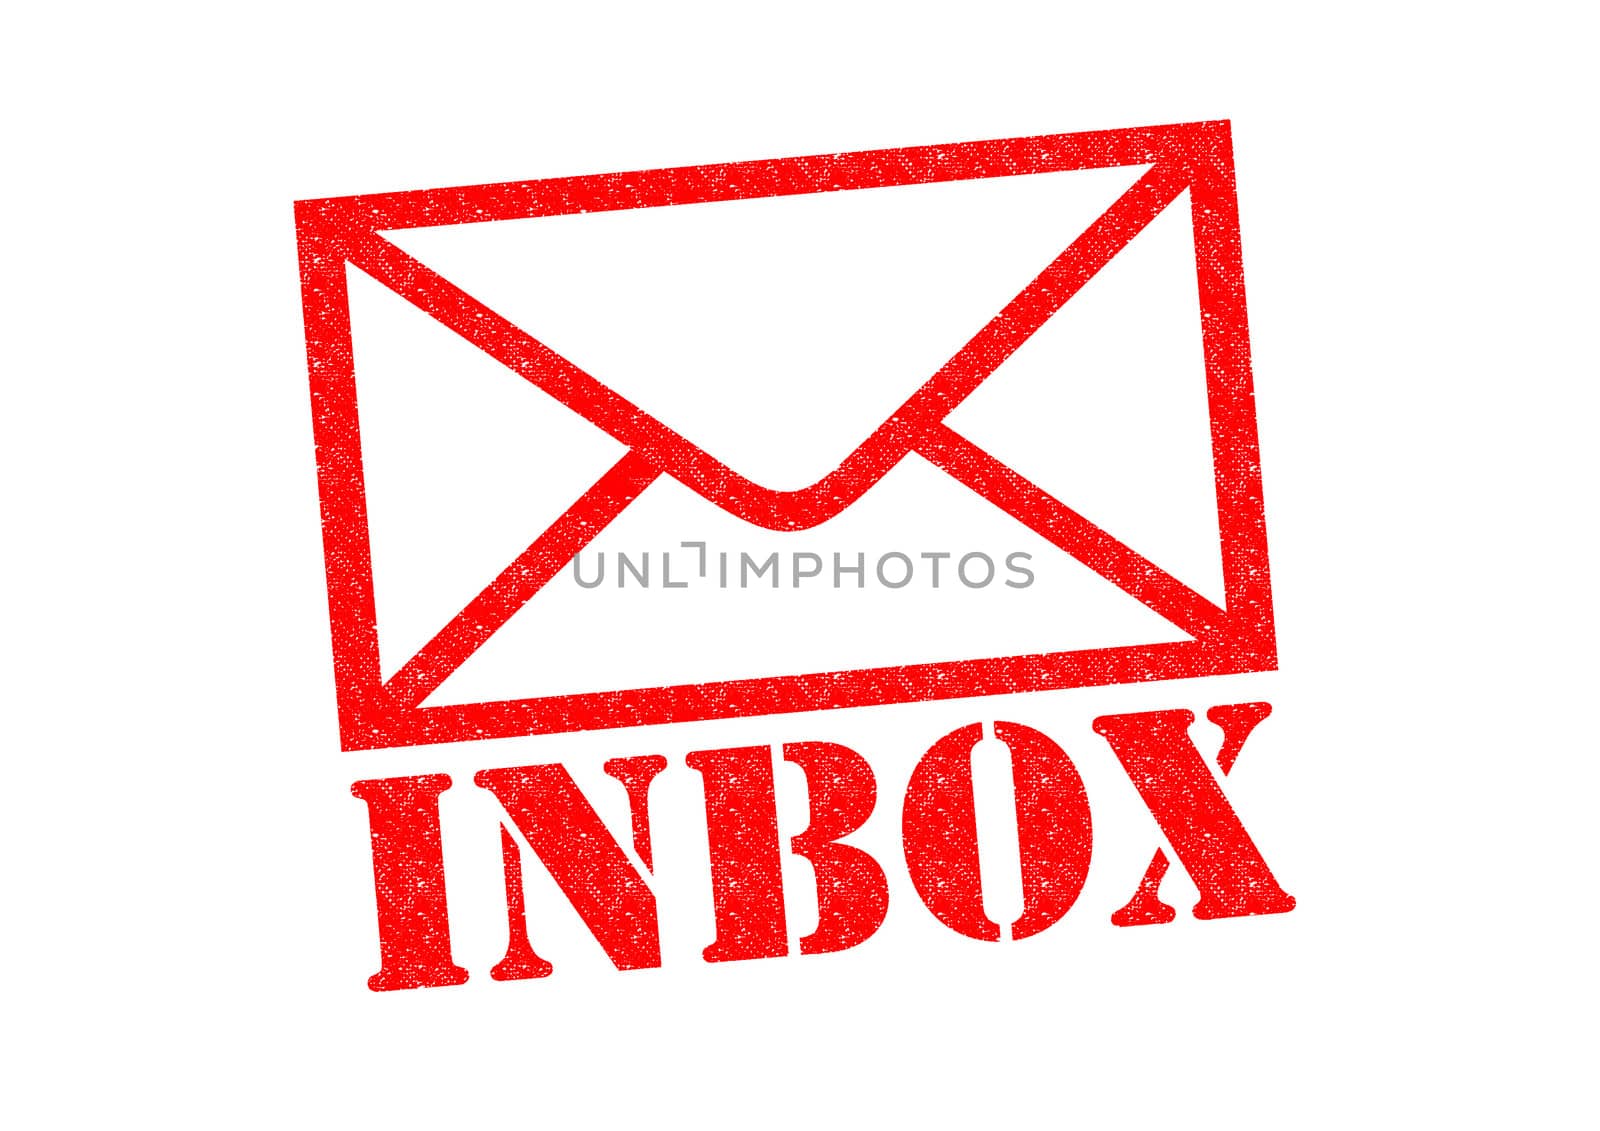 INBOX red Rubber Stamp over a white background.